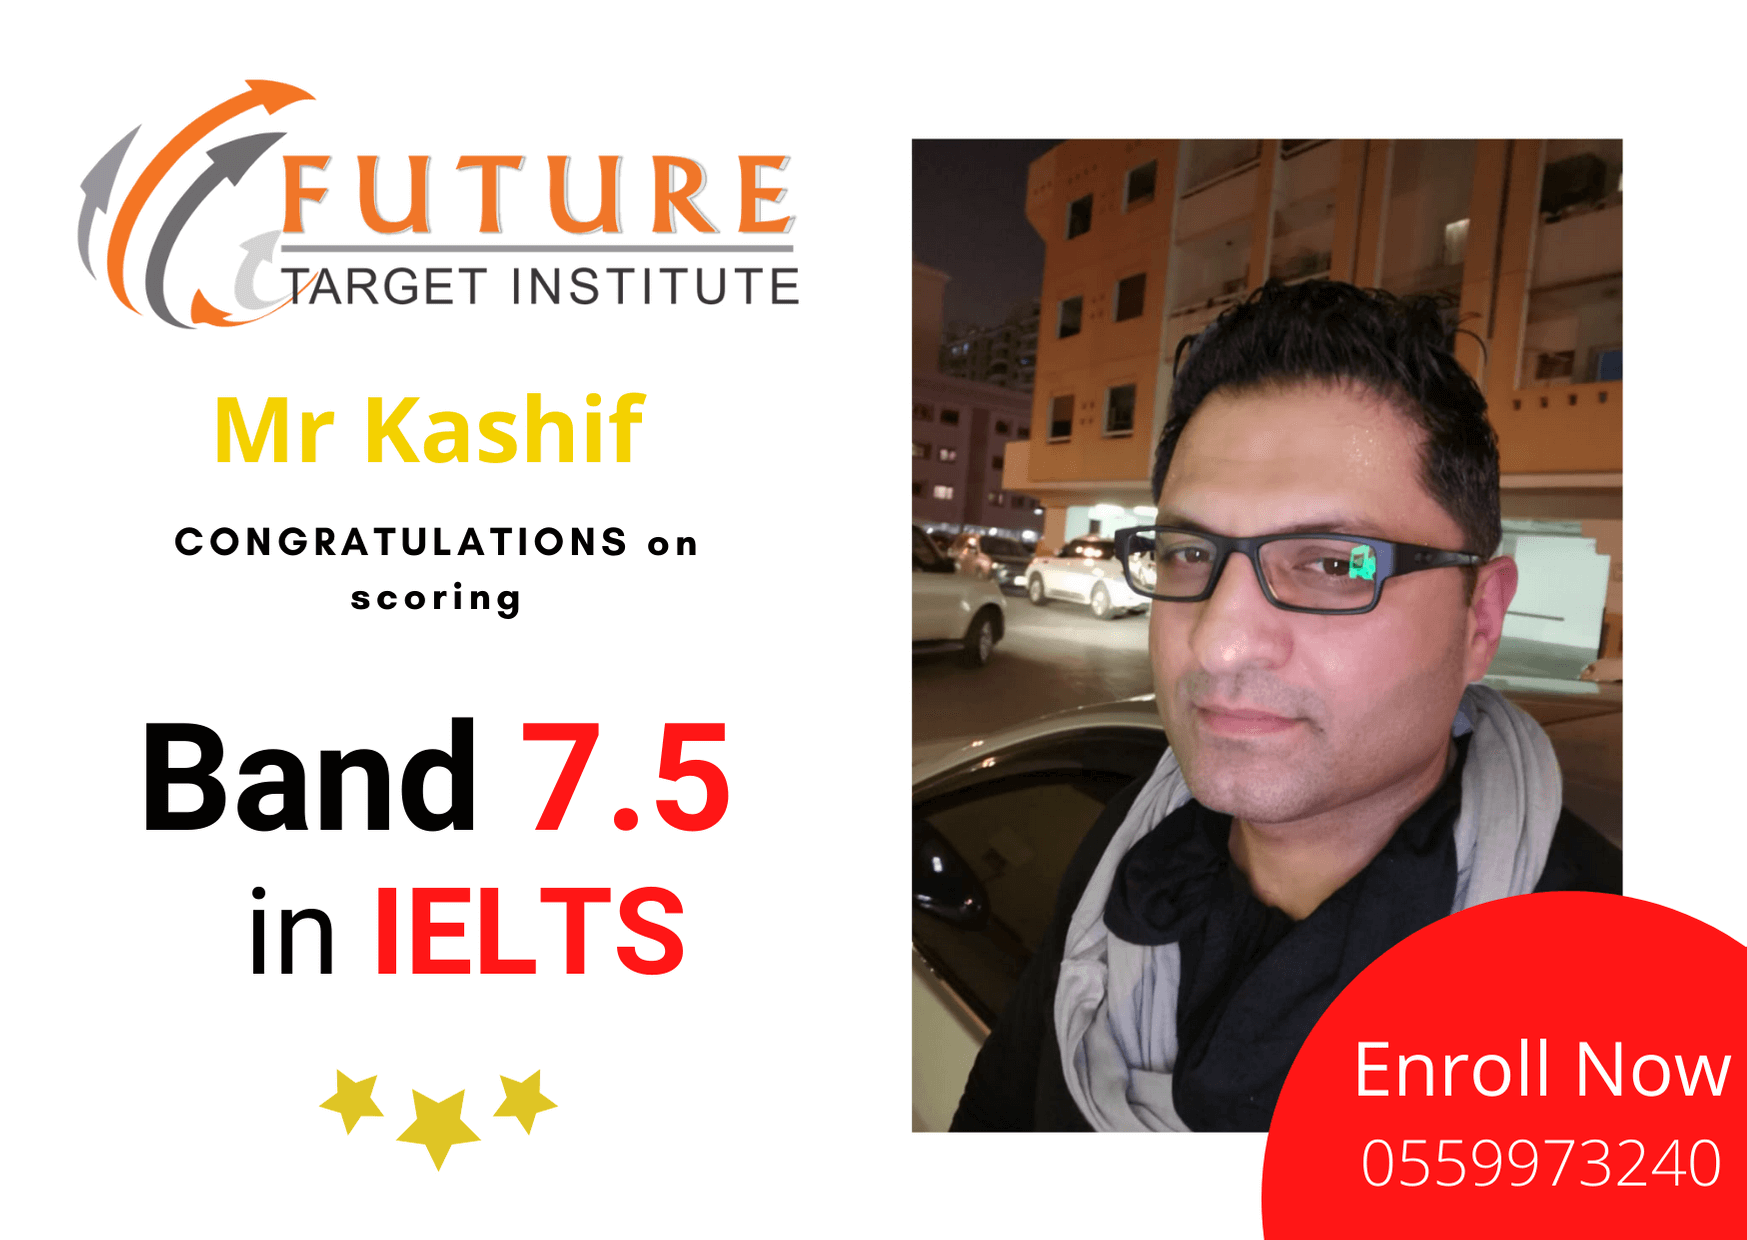 Future Target Institute's student scored Band 9 in the IELTS General Training Exam with the British Council in Dubai with the help of IELTS Practice Test